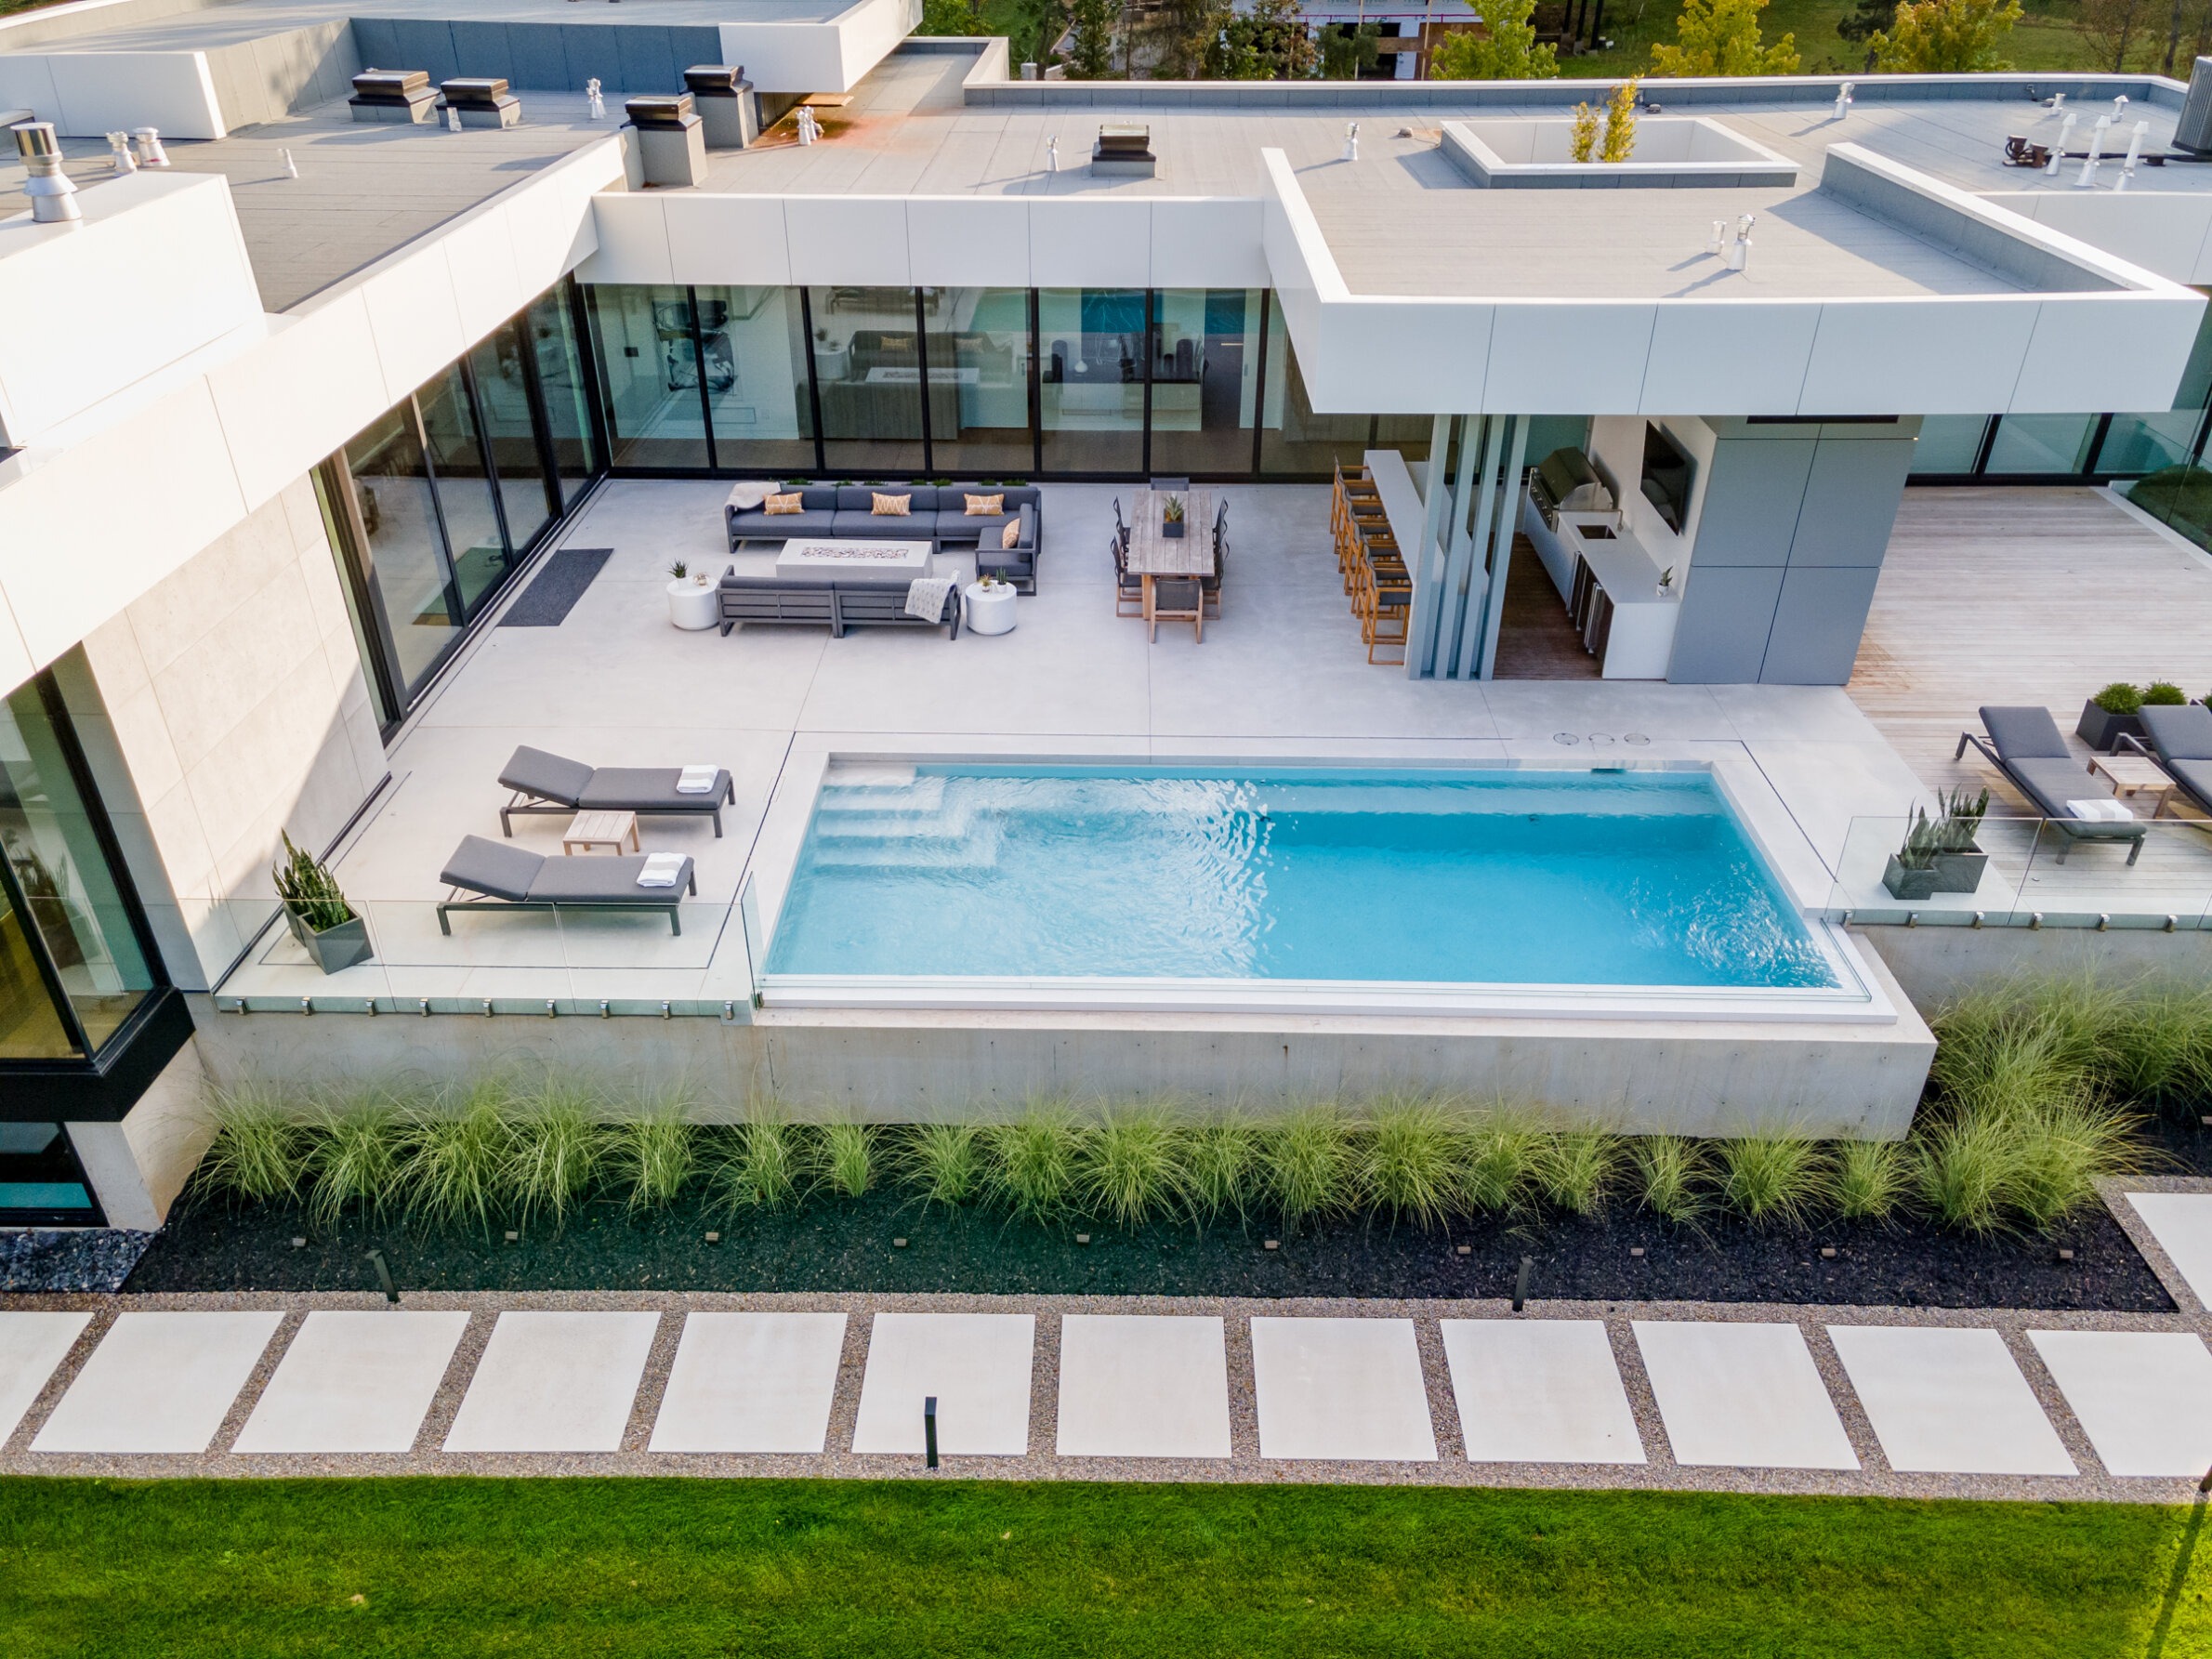 A modern house with flat roofs, expansive windows, an outdoor pool, patio furniture, and carefully landscaped garden with a path of stepping stones.